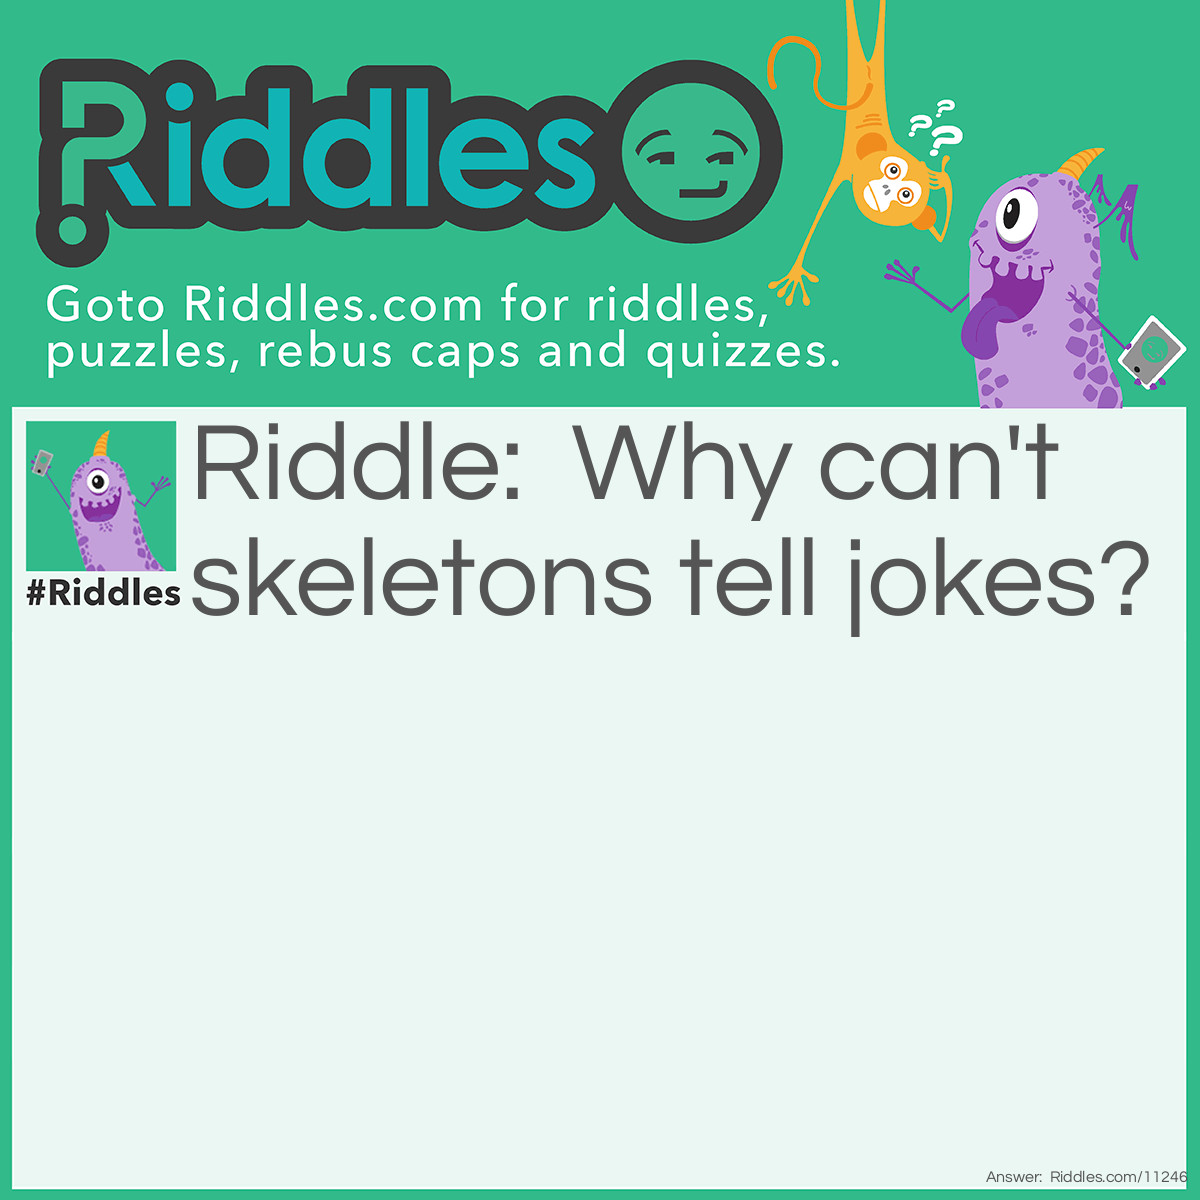 Riddle: Why can't skeletons tell jokes? Answer: Because they don't have a funny bone!